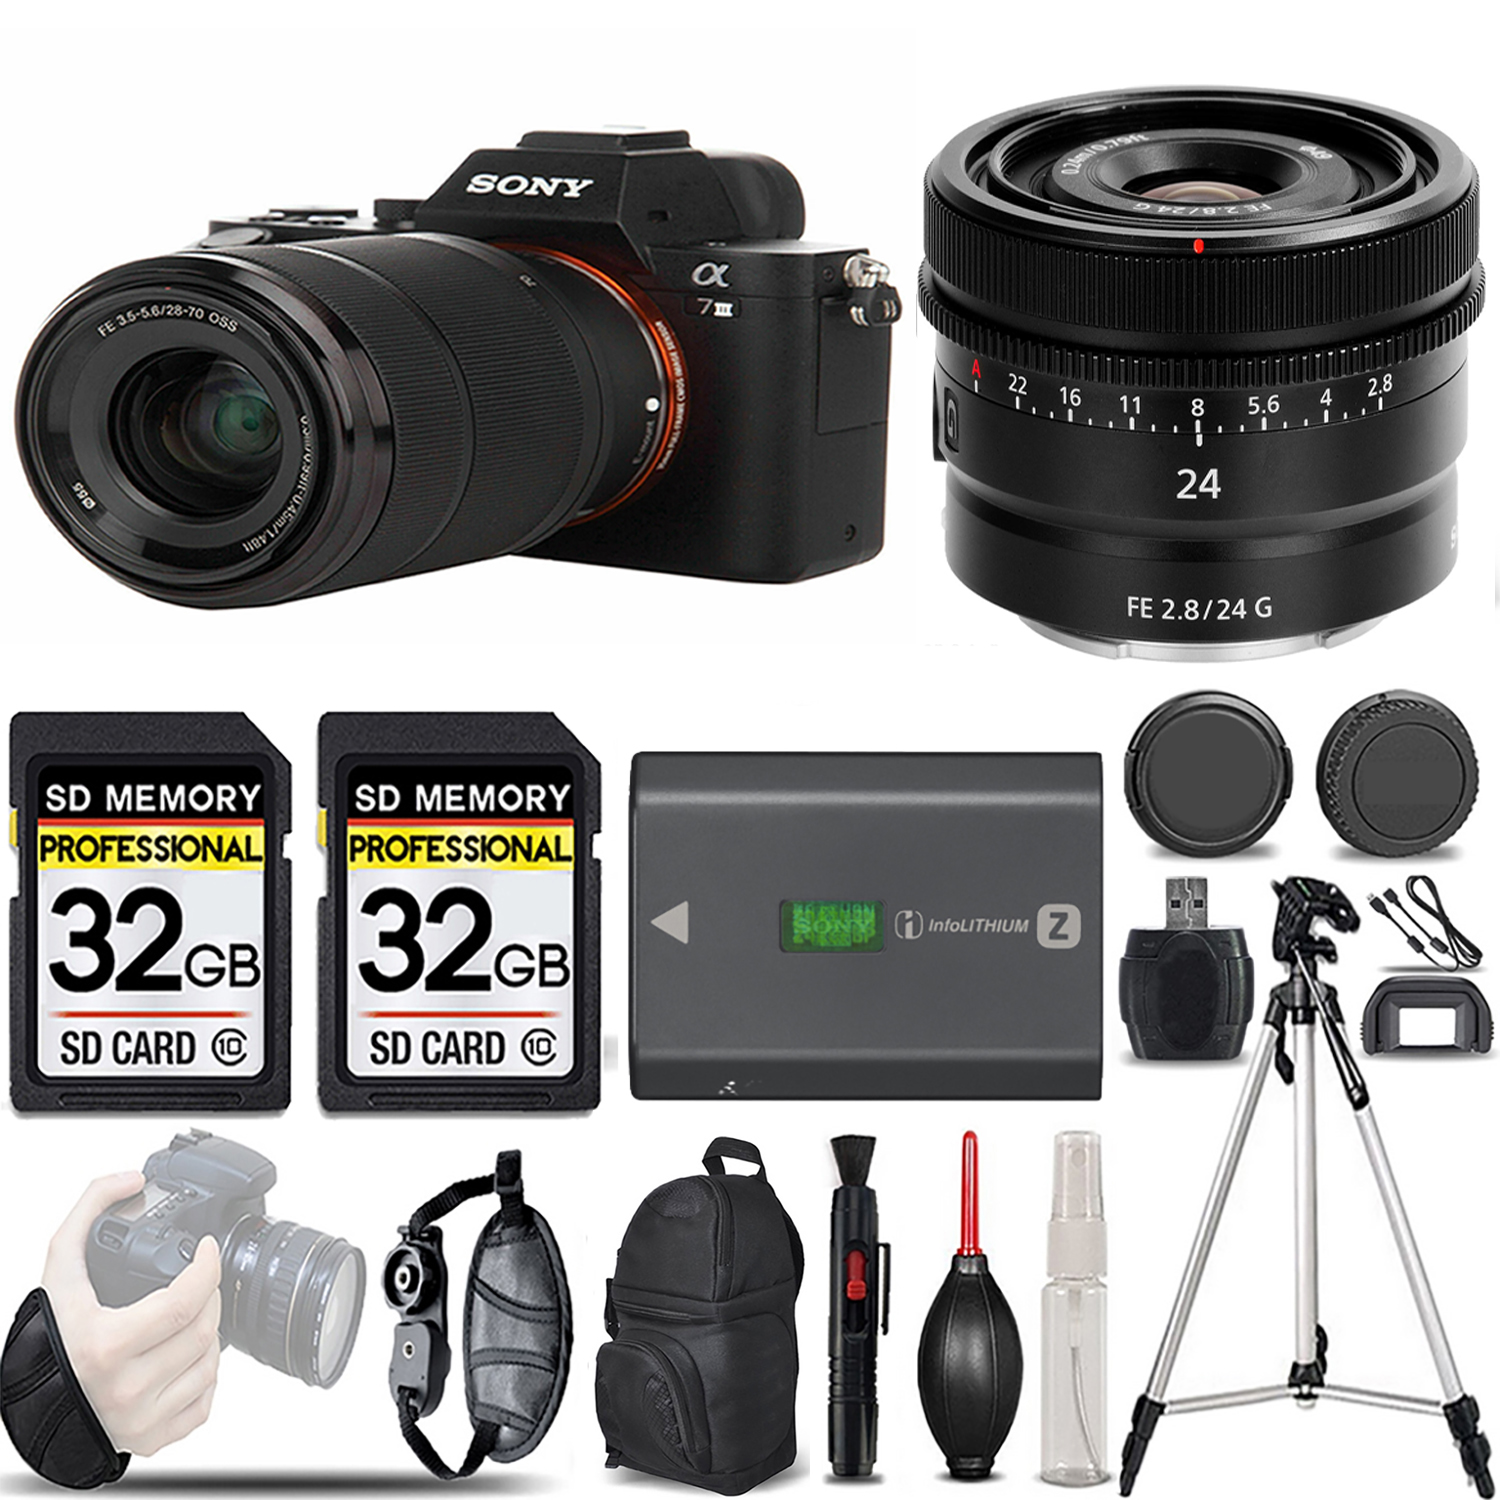 a7 III  Camera + 28-70mm Lens + 24mm Lens + Extra Battery + 64GB -Basic Kit *FREE SHIPPING*